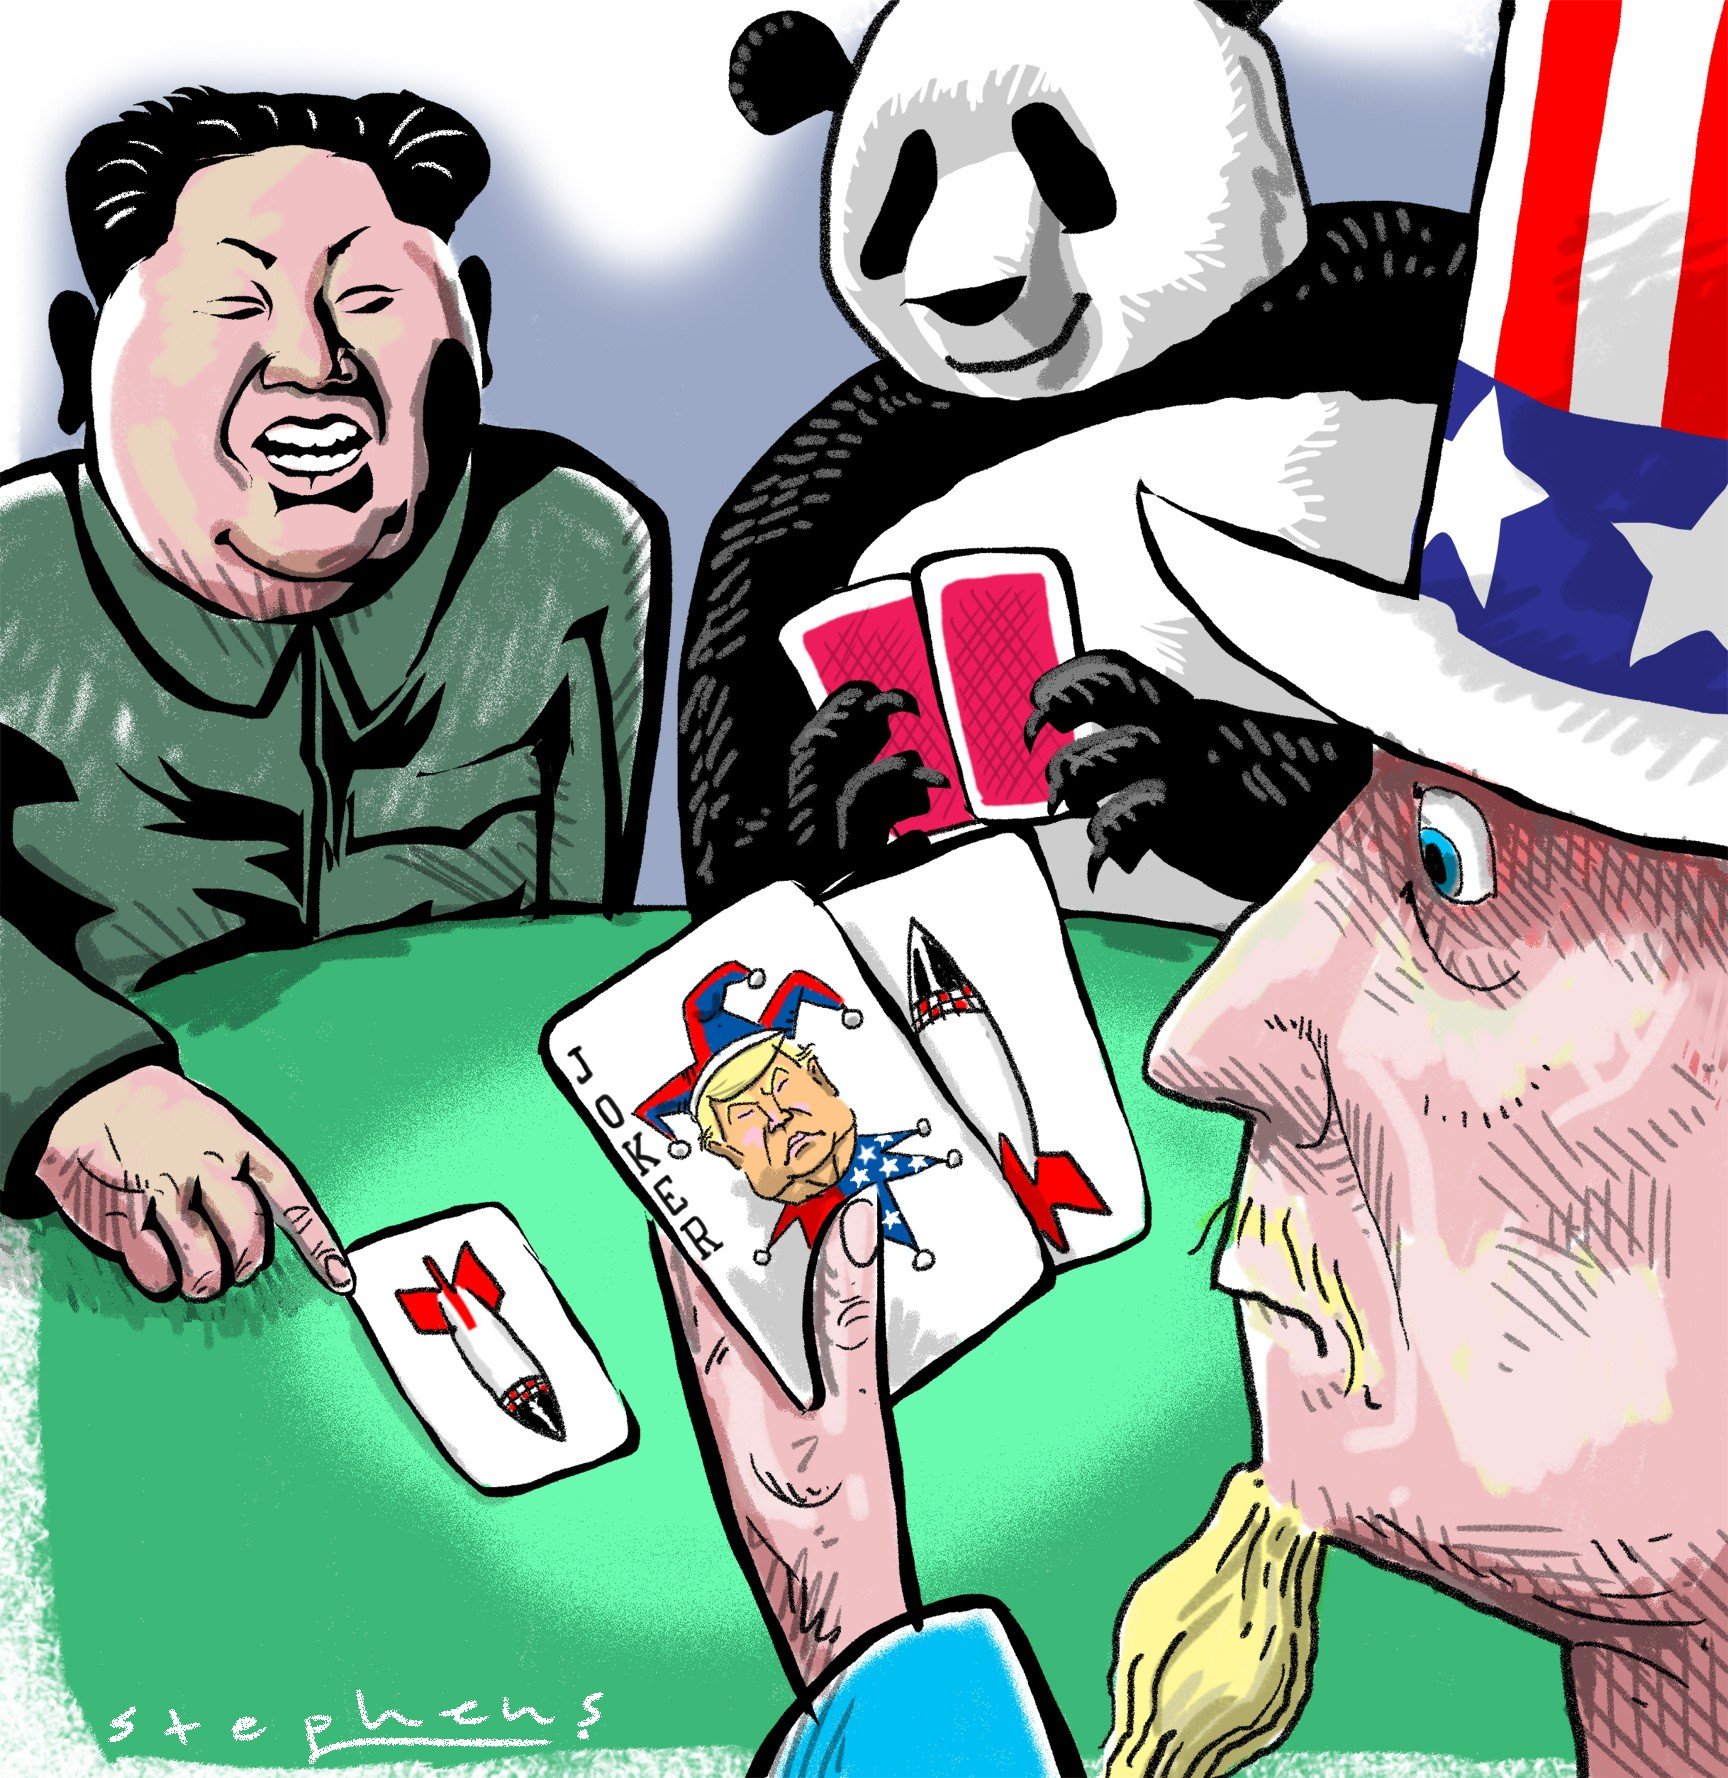 Hugh White says Washington cannot disarm North Korea without risking major war, and empty threats only make America look weak and undermine its Asian alliances. China, its strategical rival, will benefit